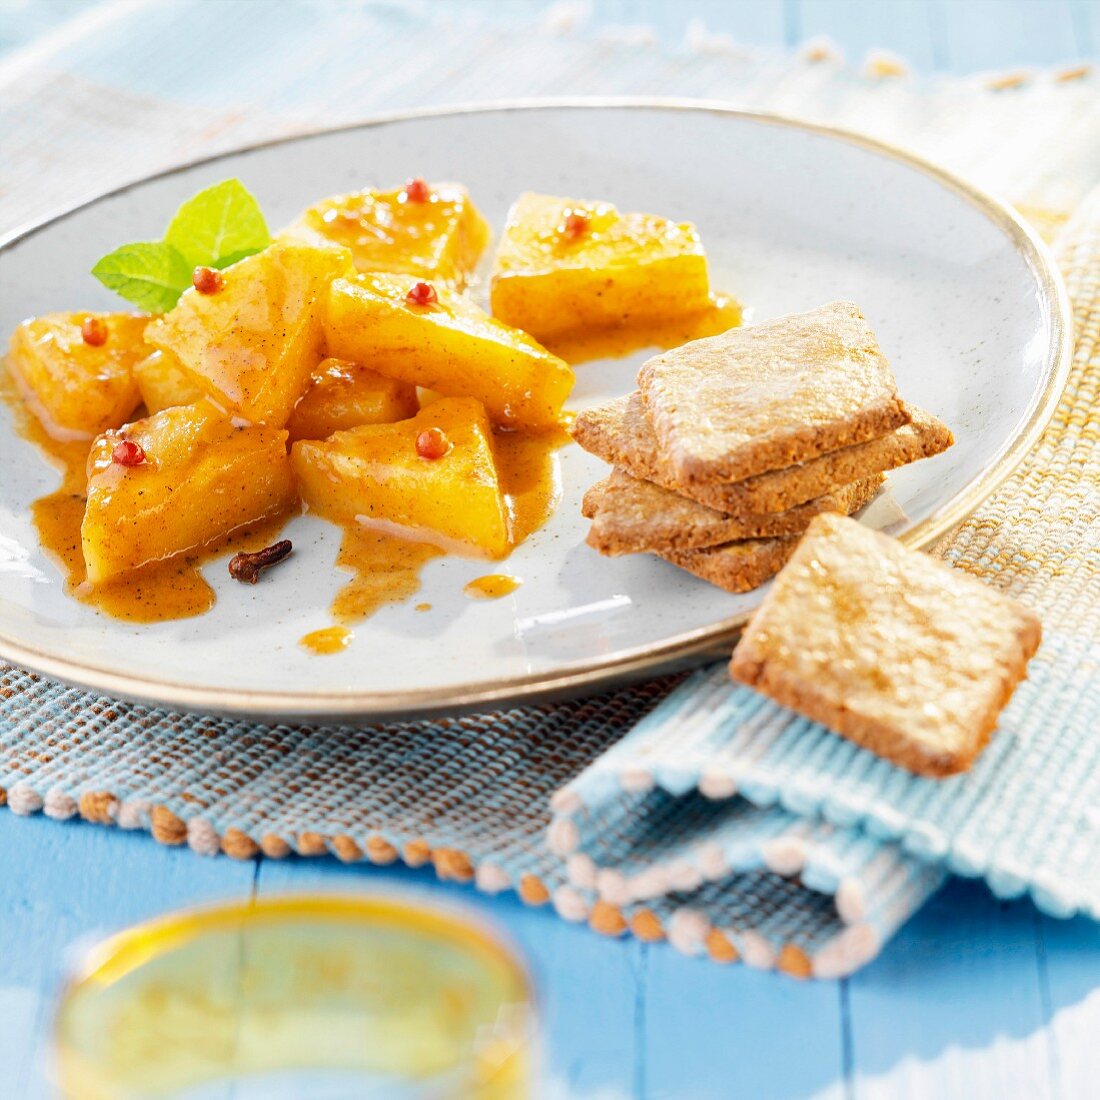 Pineapple with spices and ginger biscuits